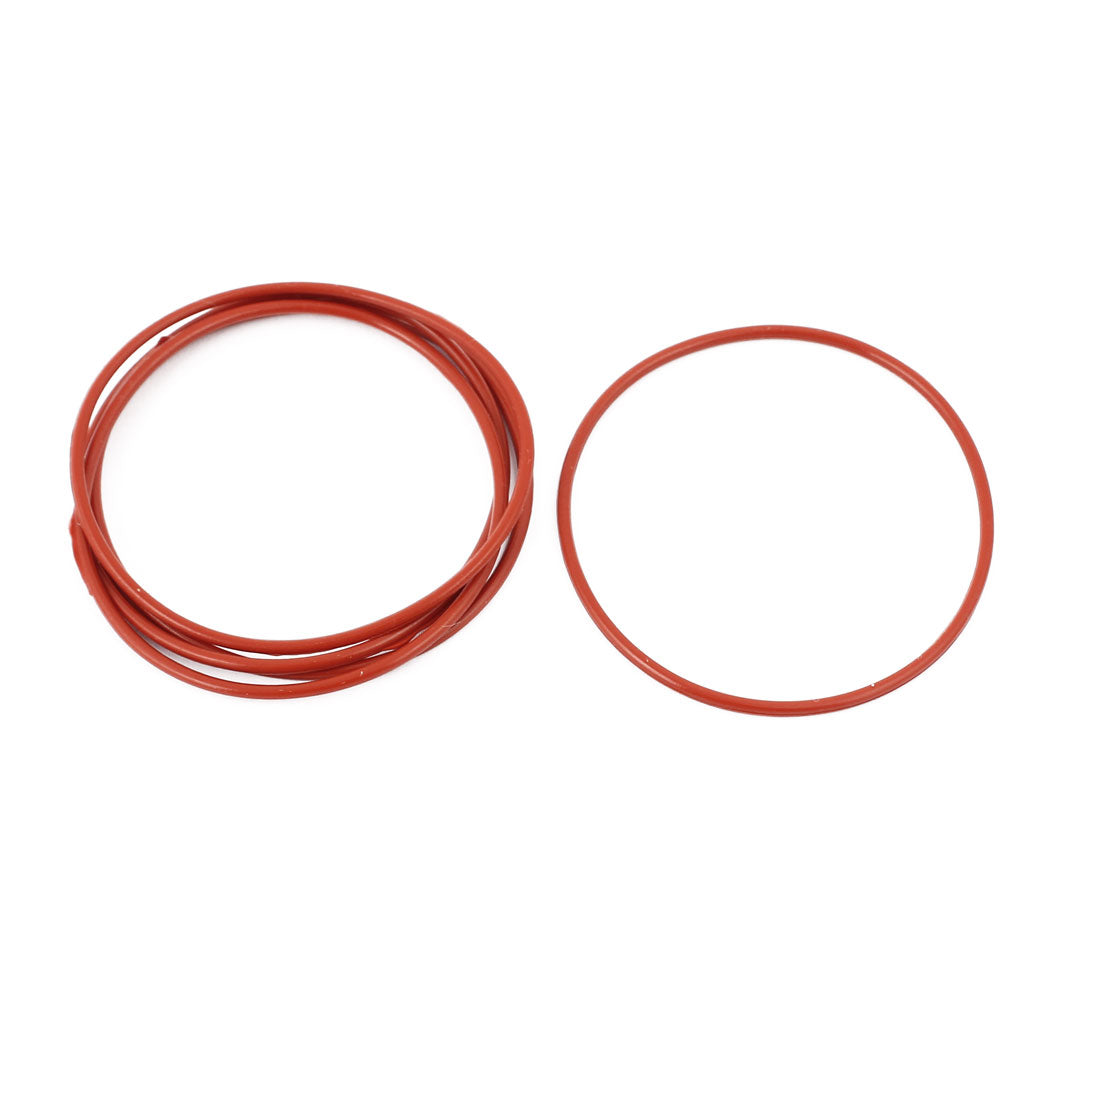 uxcell Uxcell 5pcs 1.5mm Thick Heat Oil Resistant Mini O-Ring Rubber Sealing Ring 45mm OD Red